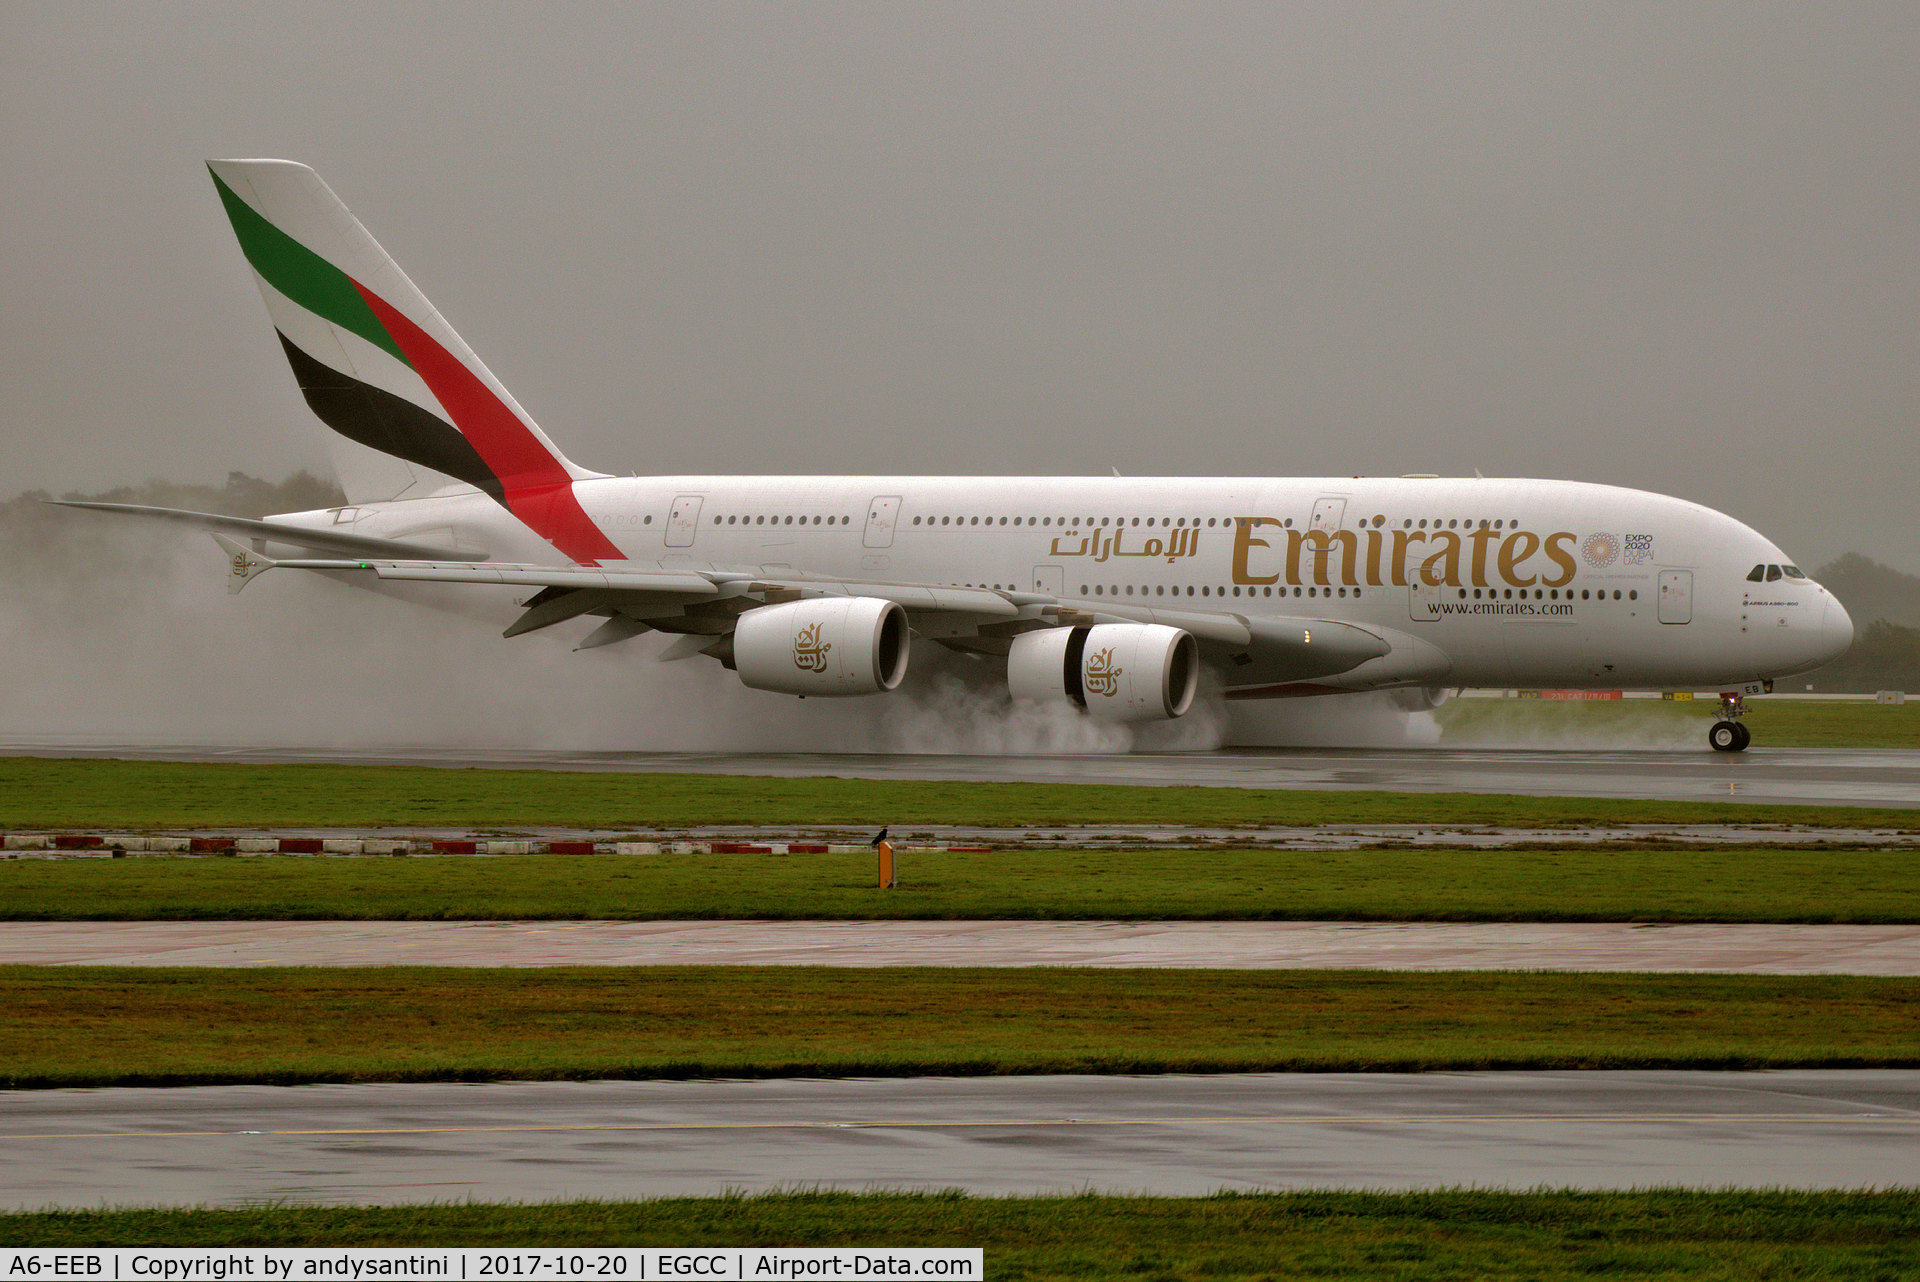 A6-EEB, 2012 Airbus A380-861 C/N 109, landed on a wet runway